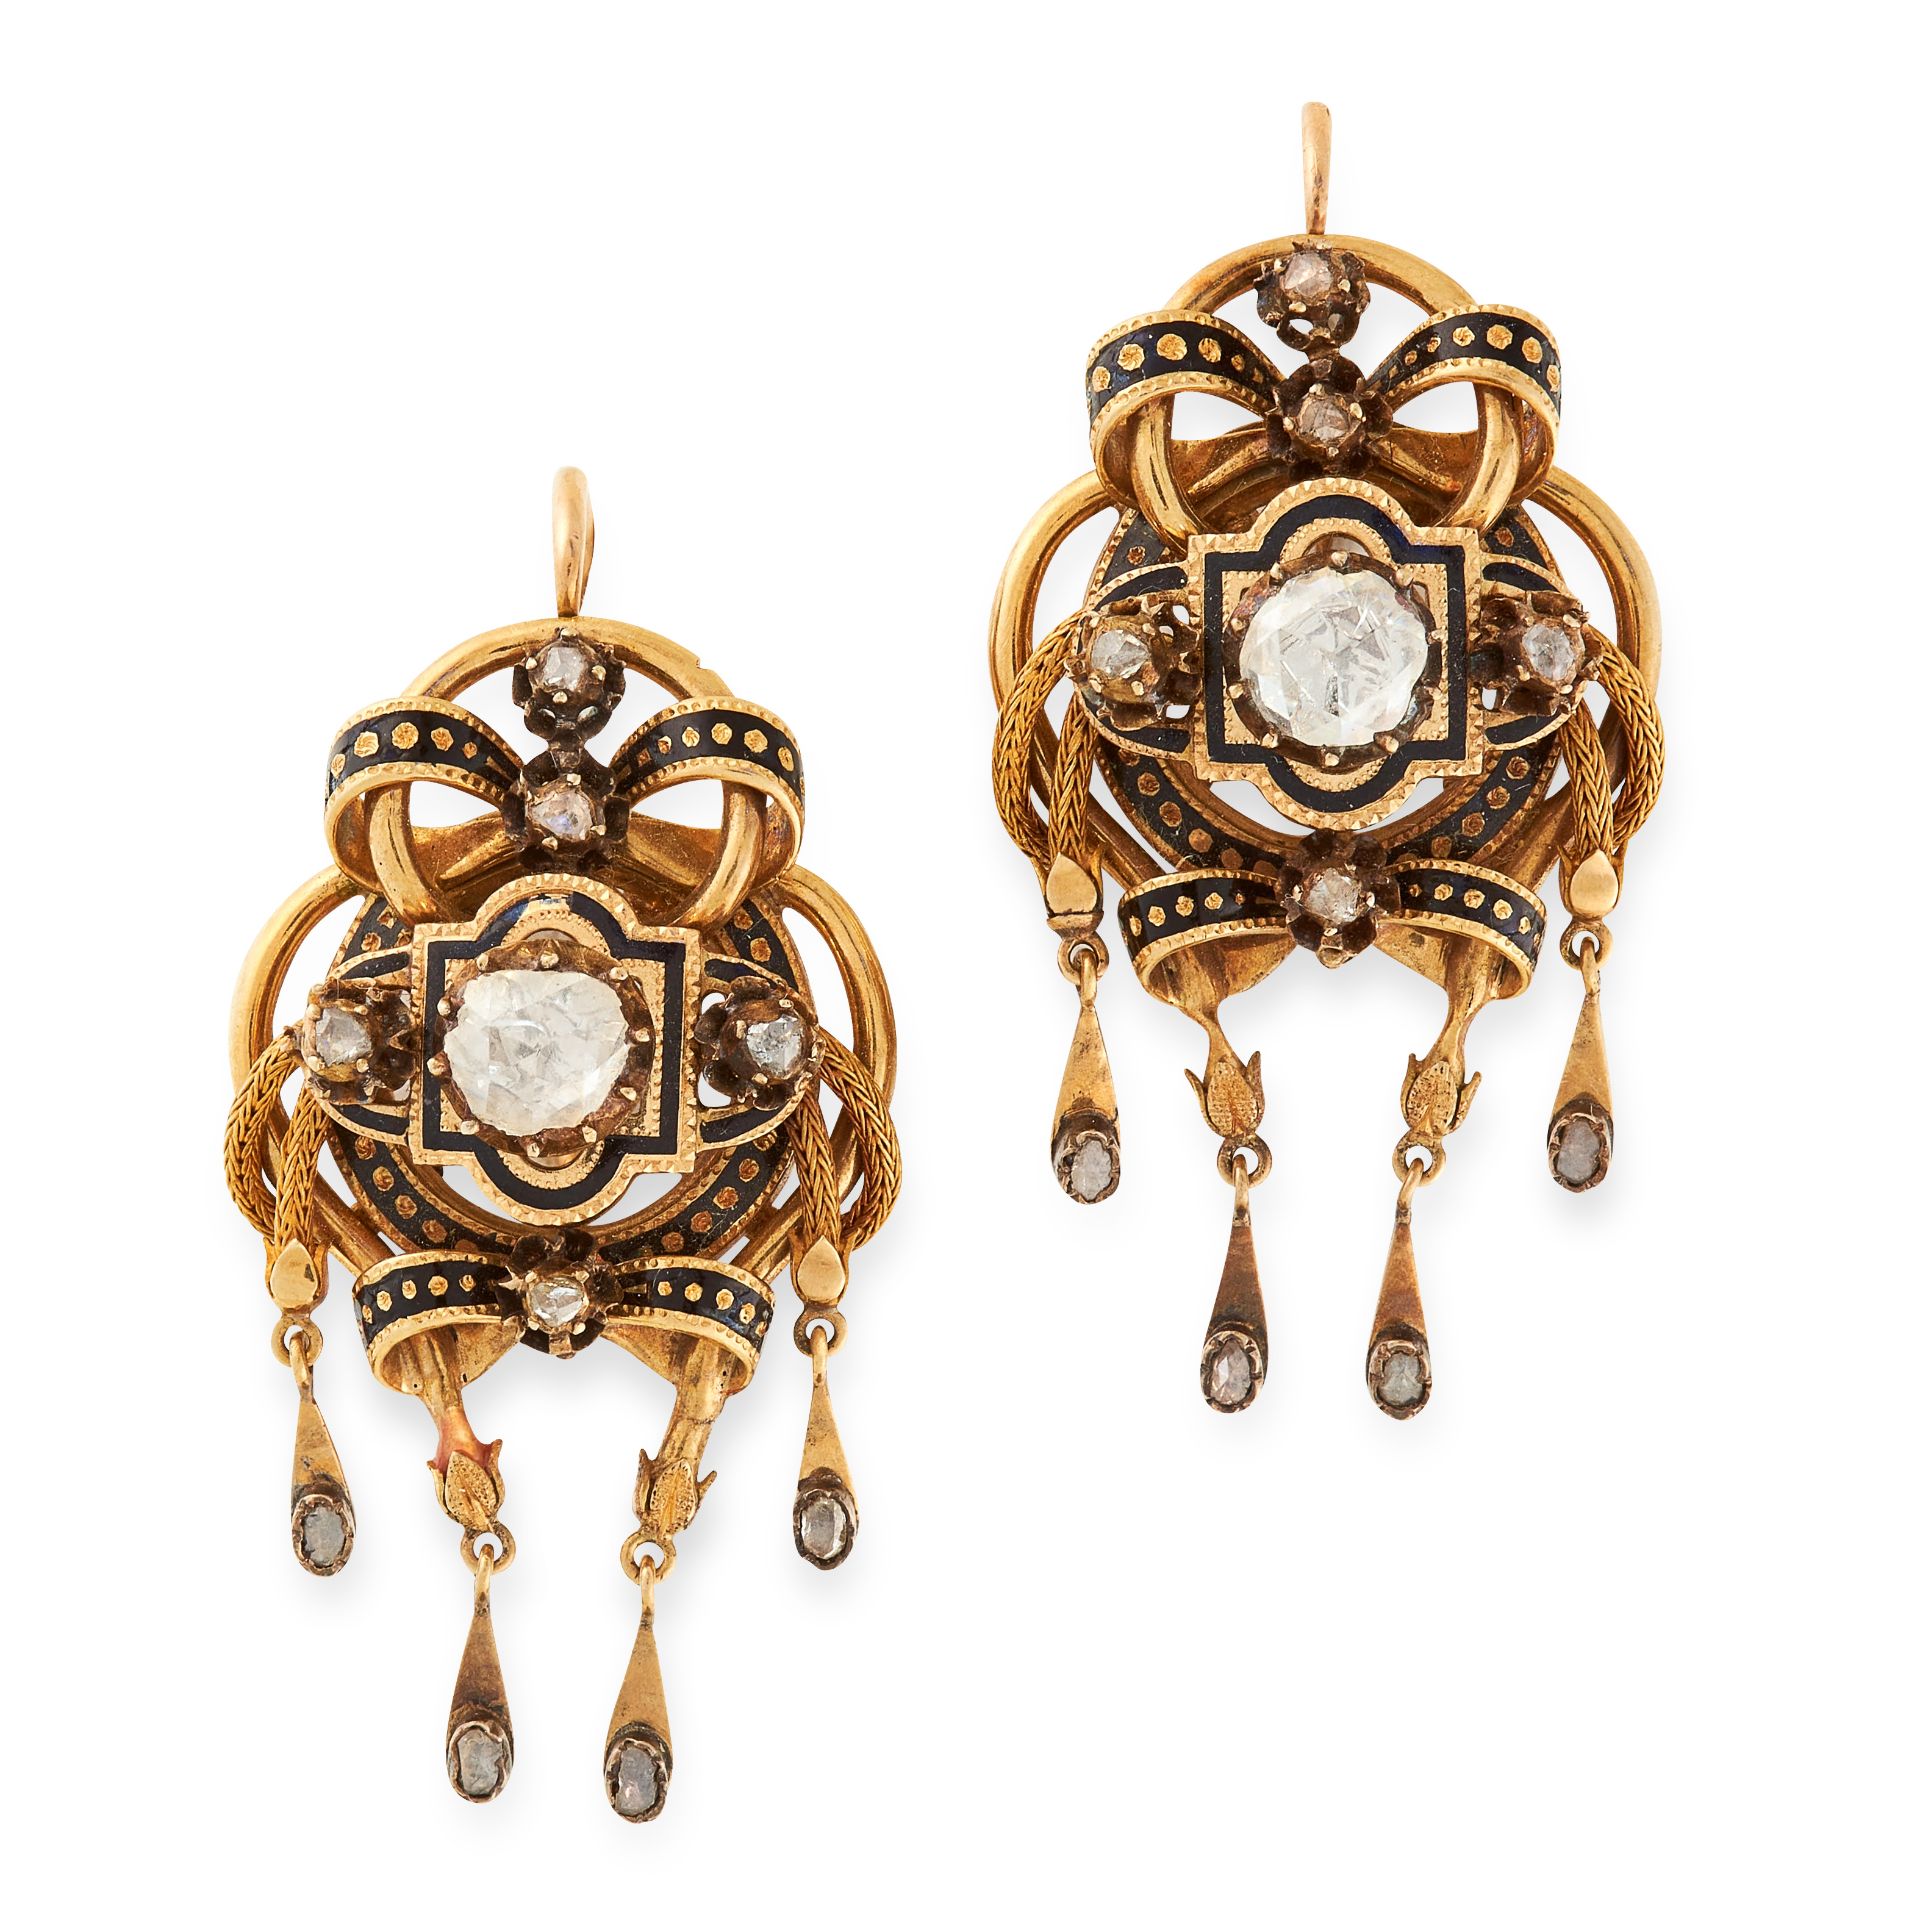 A PAIR OF ANTIQUE ENAMEL AND DIAMOND EARRINGS, 19TH CENTURY in 18ct yellow gold, set with central